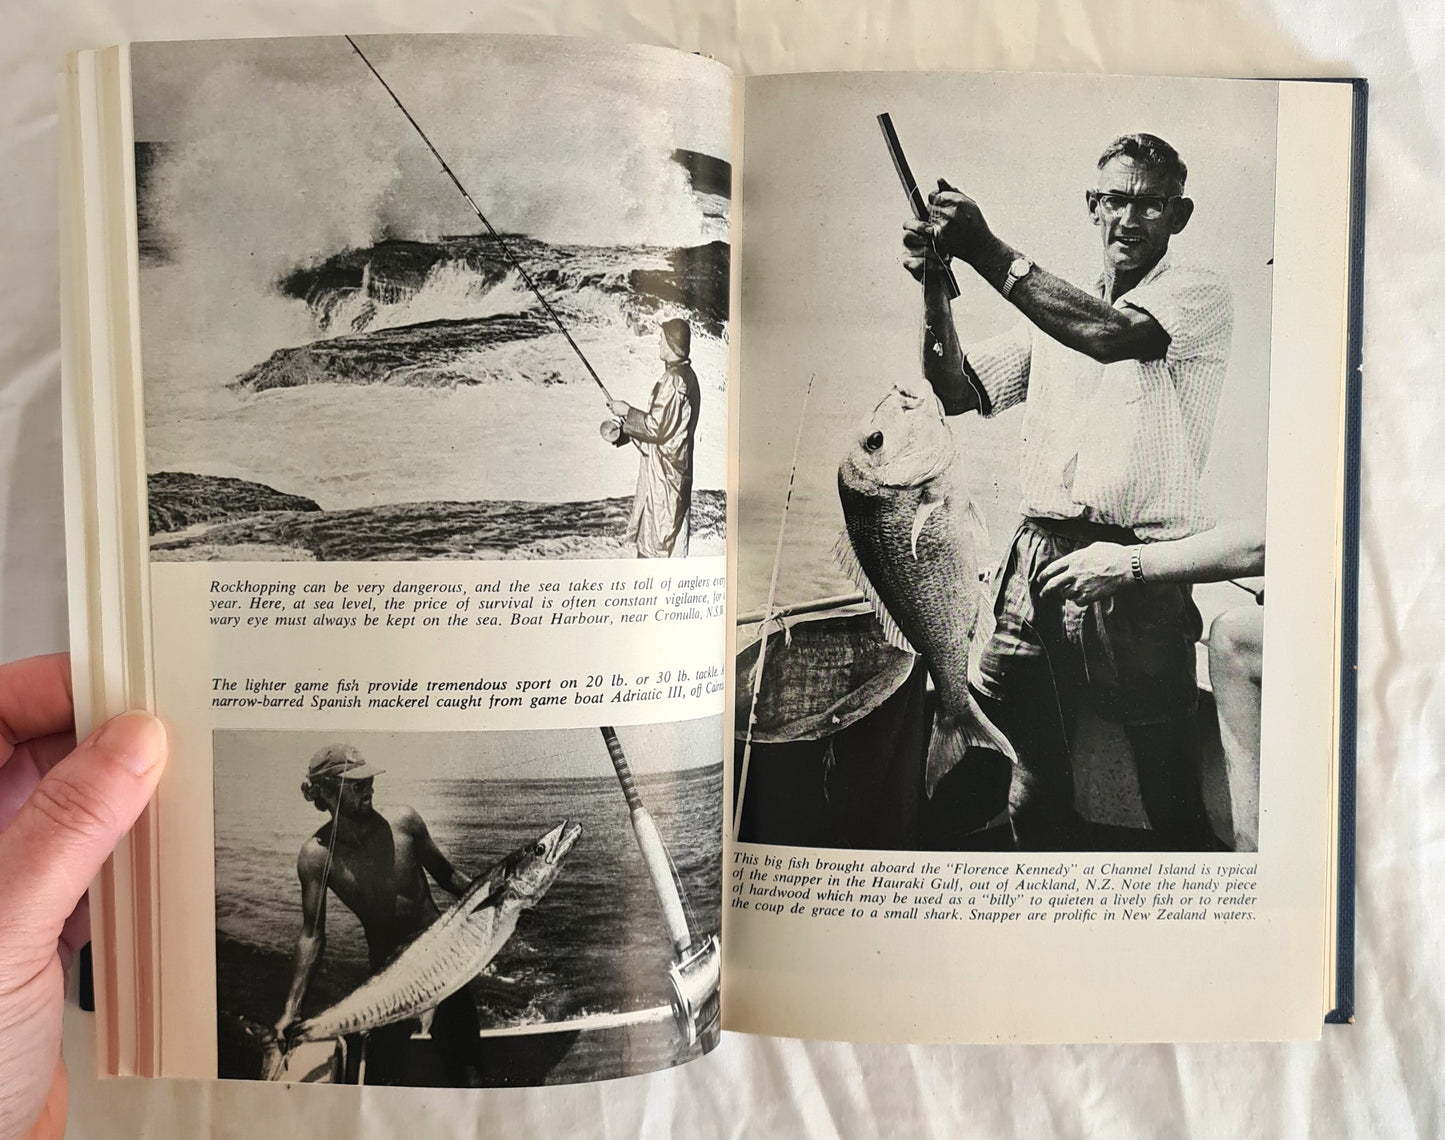 The Saltwater Angler by Wal Hardy (no jacket)